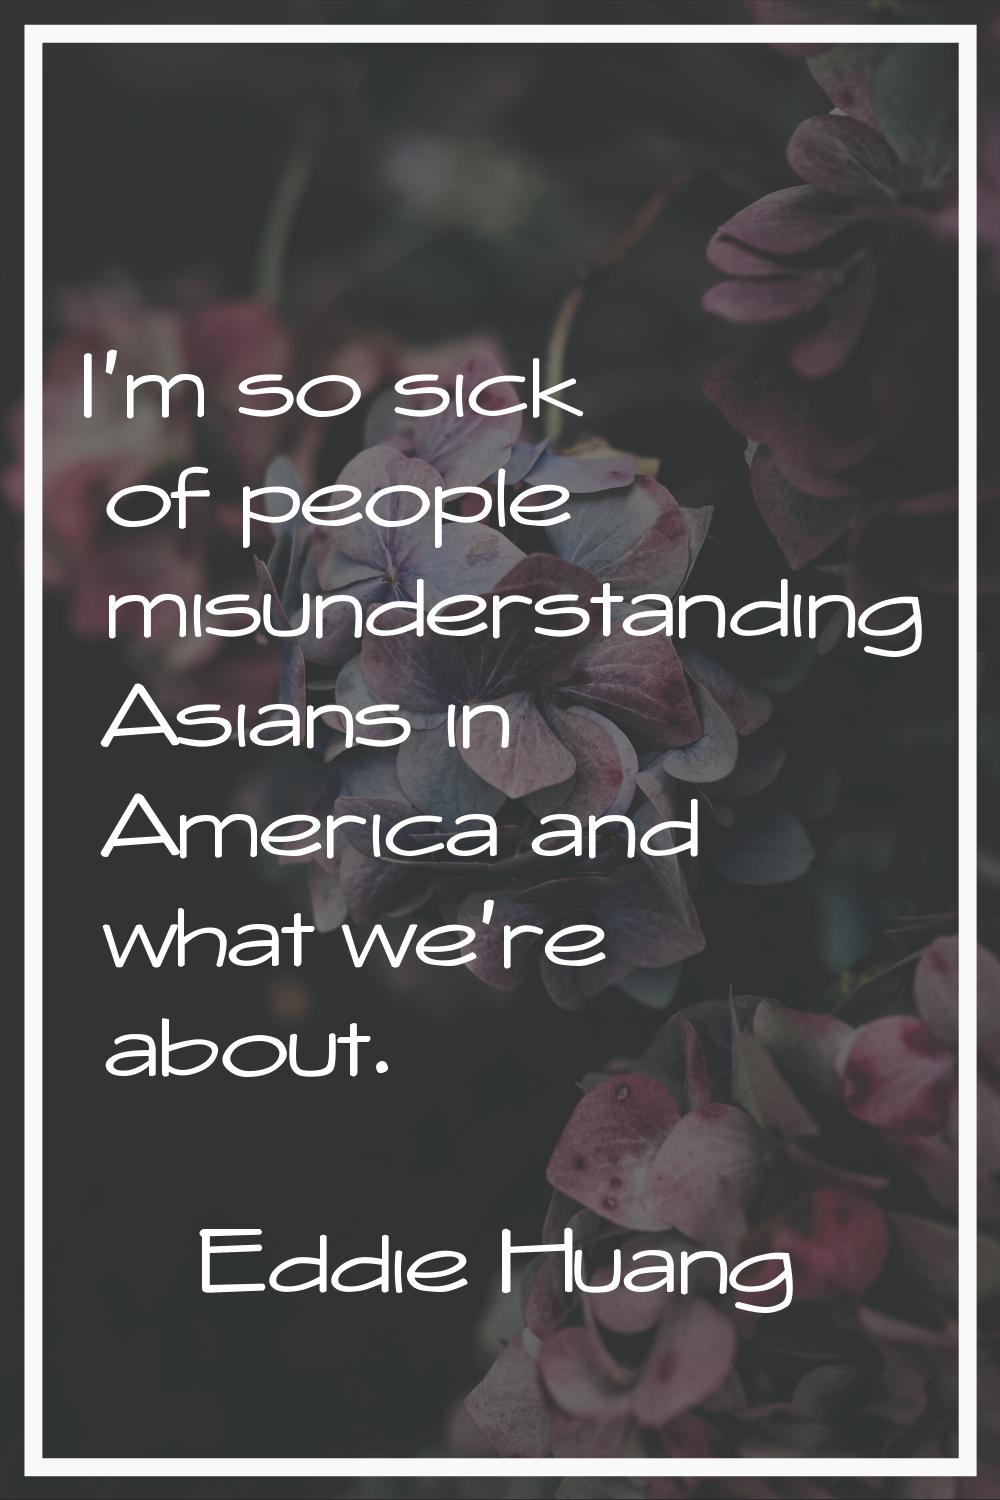 I'm so sick of people misunderstanding Asians in America and what we're about.